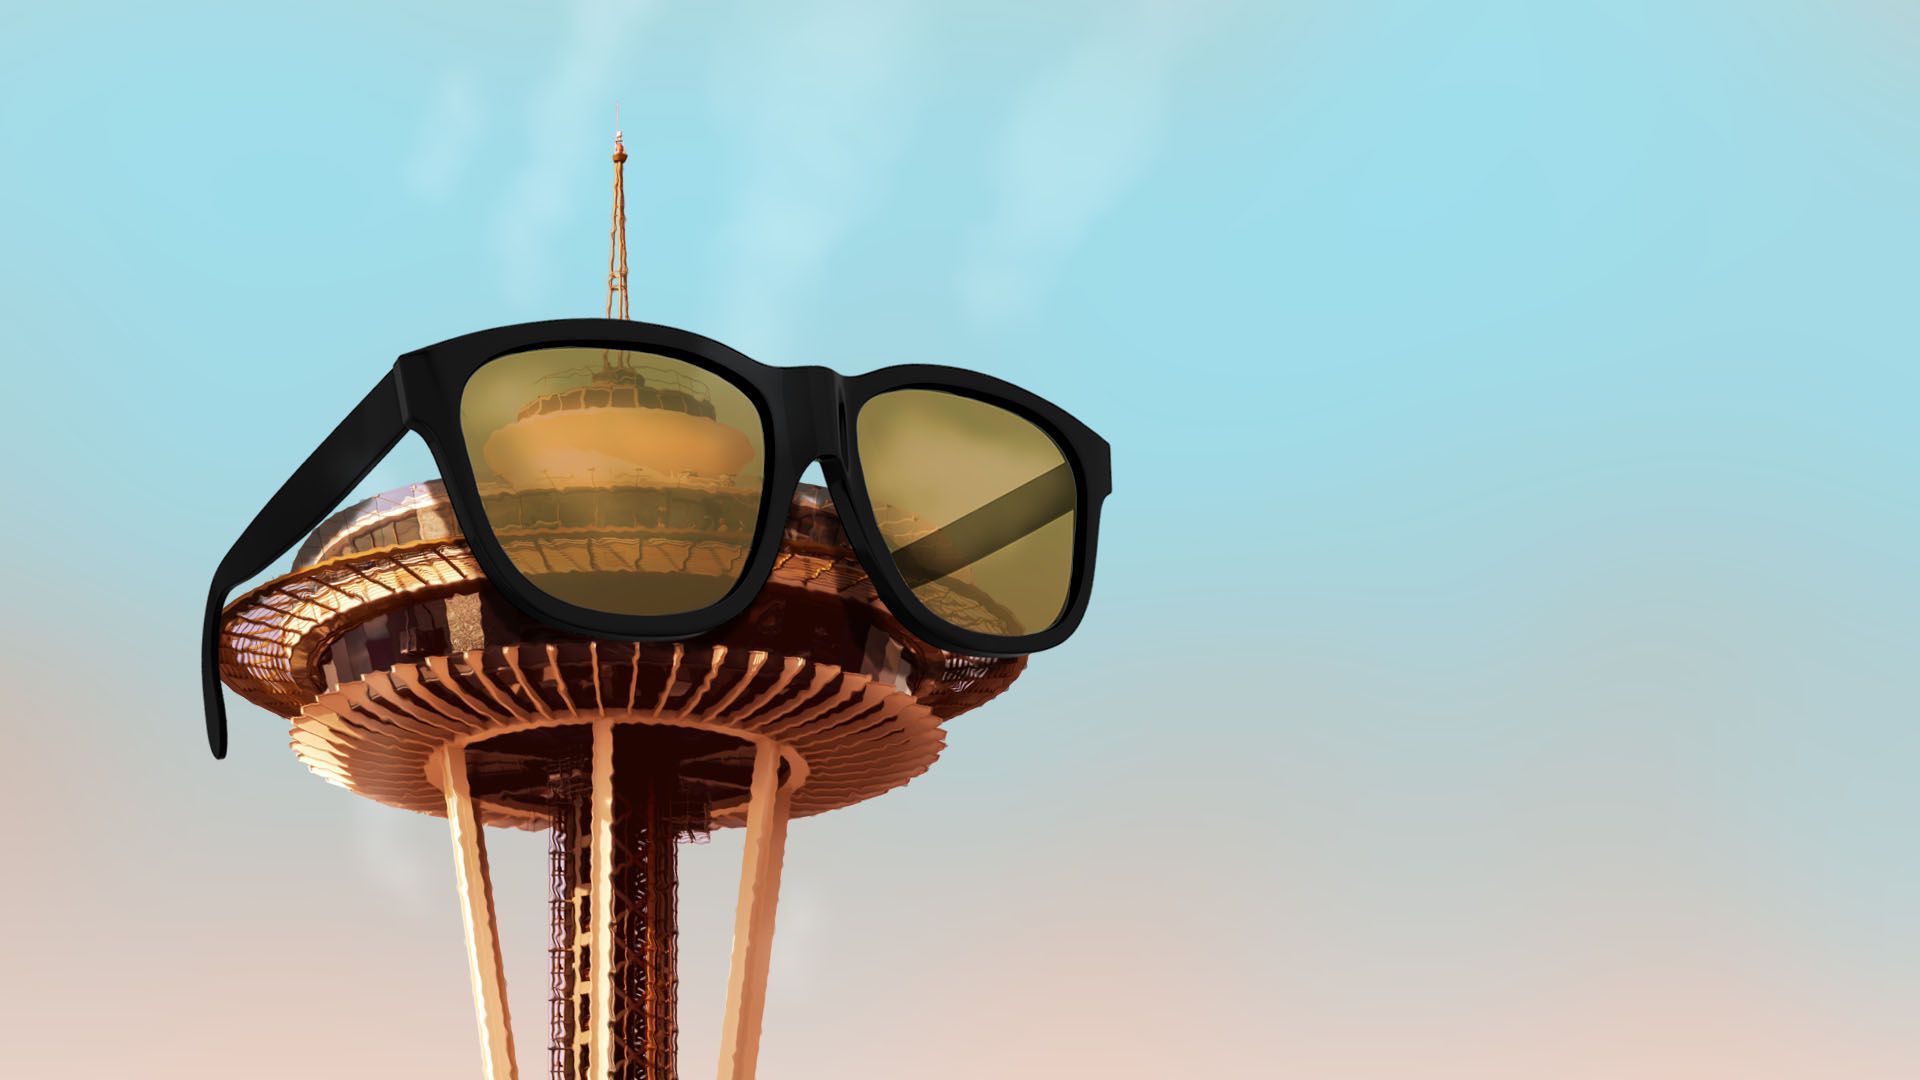 Illustration of the Seattle Space Needle wearing sunglasses